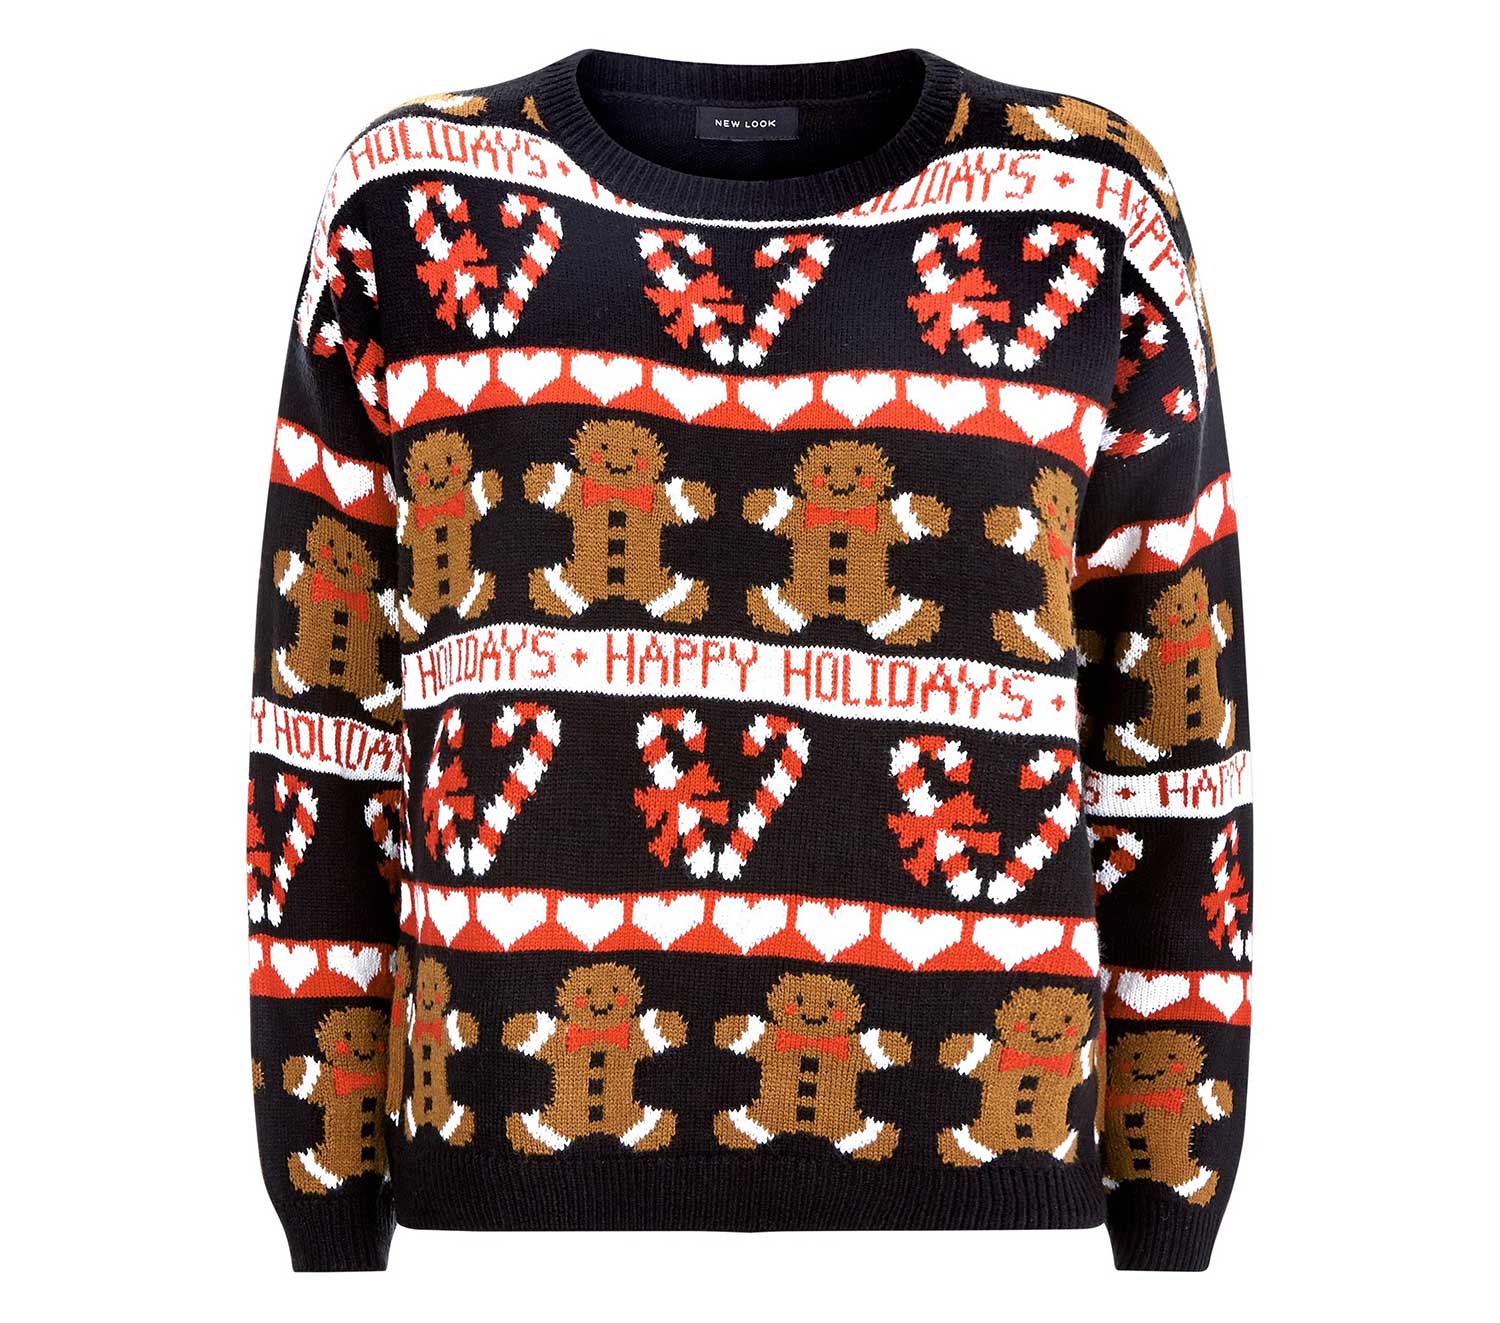 HSA Christmas Jumper Novelty Christmas Sweater for Men and Women Unisex Retro Fairisle Santa Party Jumpers Mens & Womens Warm 4XL Regular Fit Knitted Christmas Holiday Jumpers in Sizes S